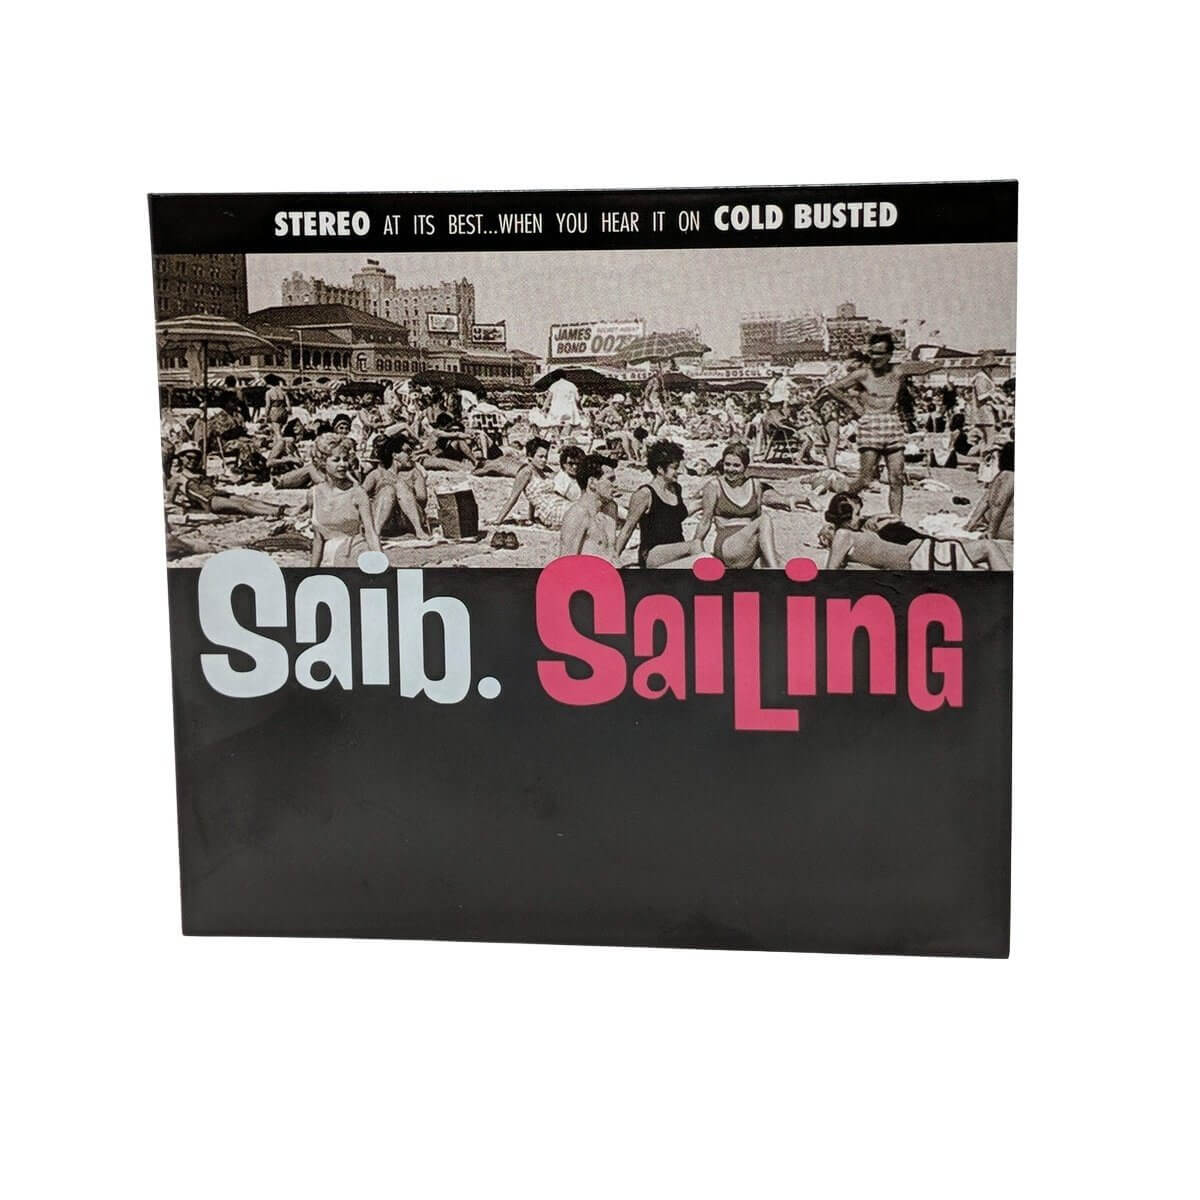 saib. - Sailing - Limited Edition Compact Disc - Cold Busted